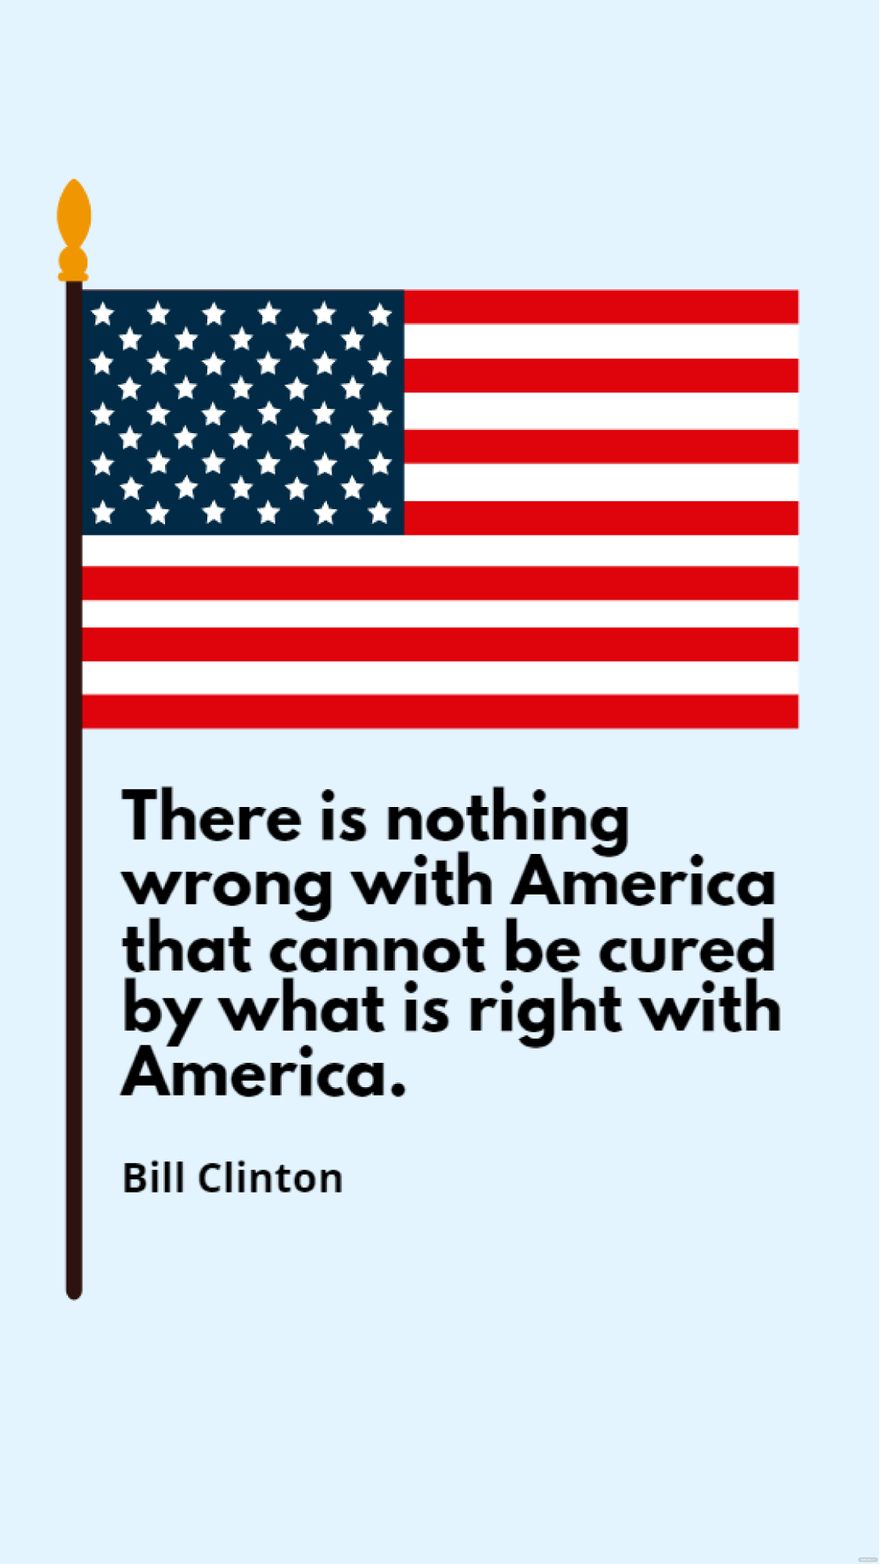 Bill Clinton - There is nothing wrong with America that cannot be cured by what is right with America.